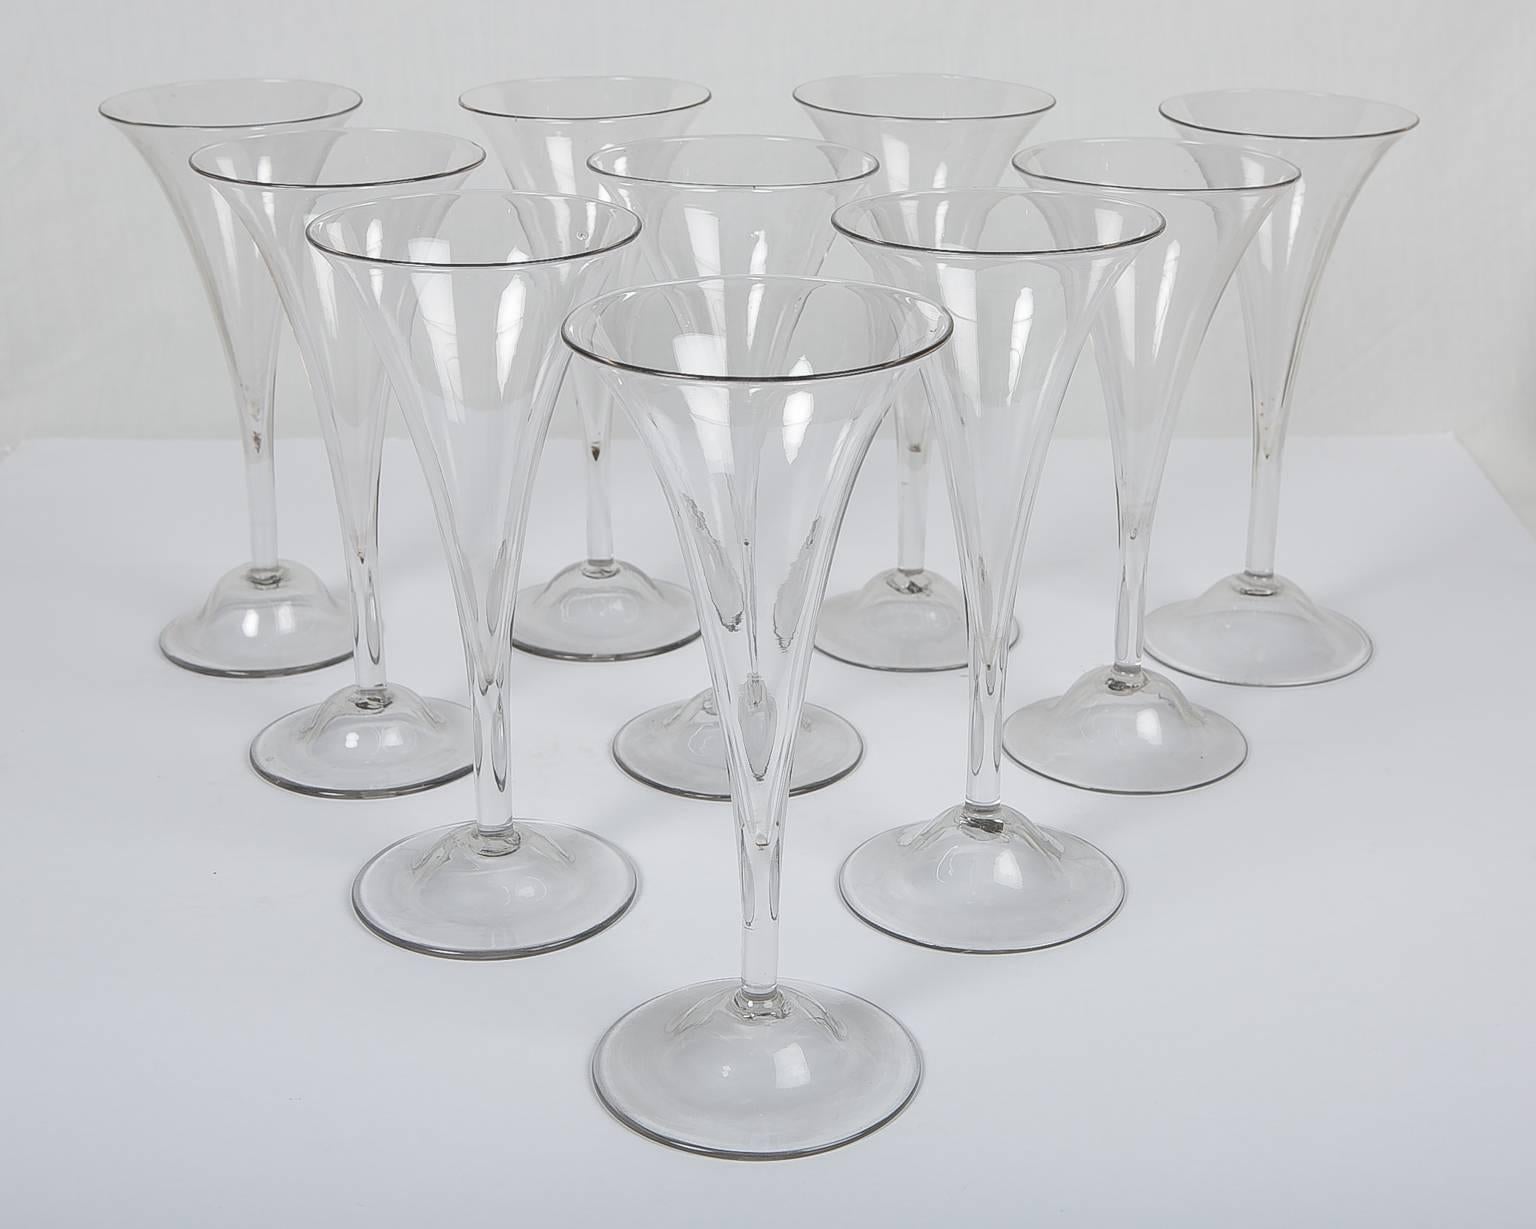 Cheers to welcoming friends!
This is a beautiful set of ten clear large (8.5inches tall) English mid-18th century clear champagne flutes (even though in the main image the glass does not appear clear, that is due to the photoshopping. The glasses